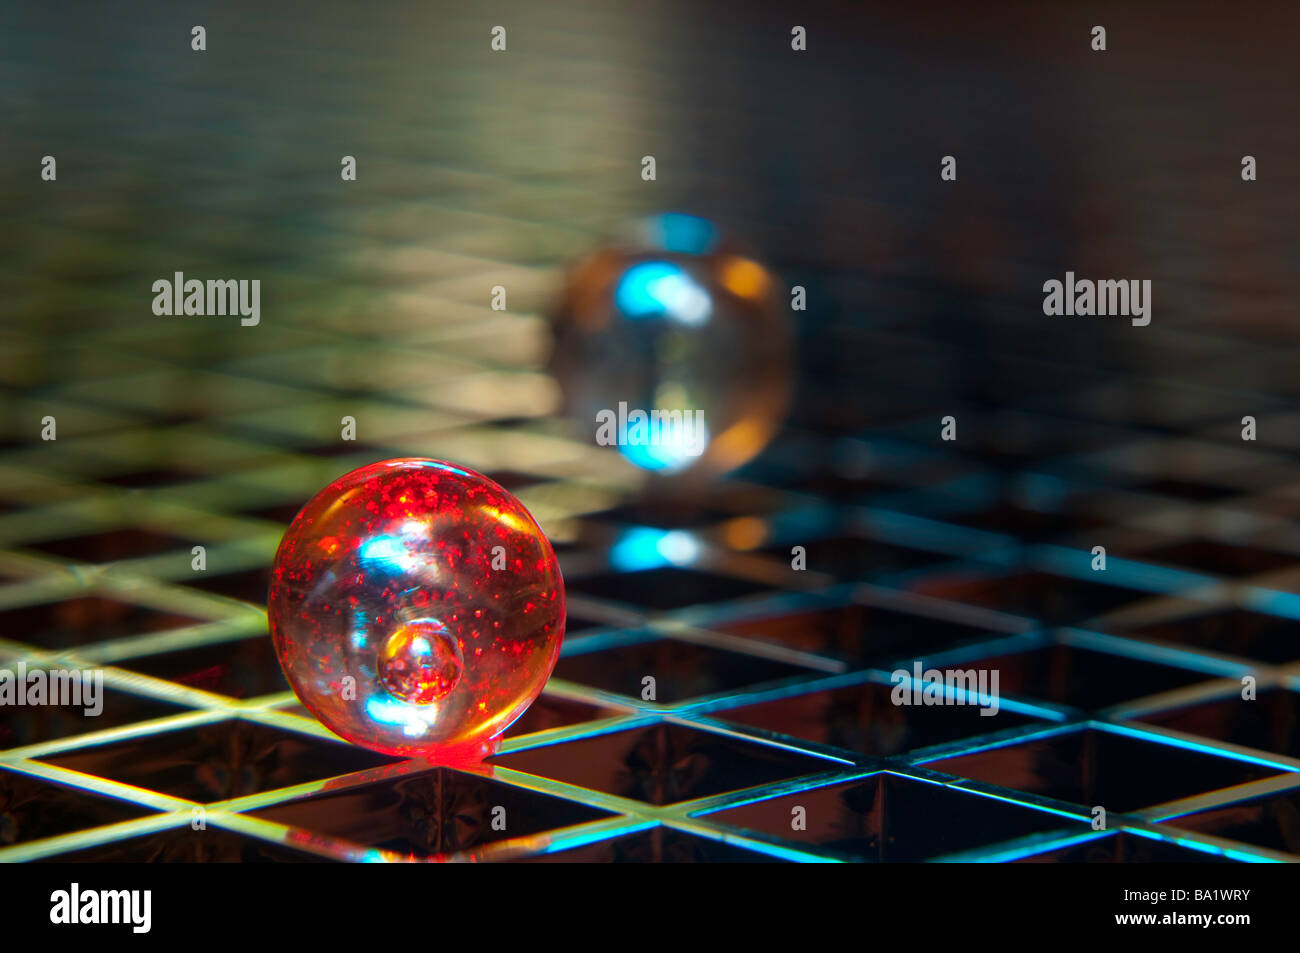 Abstract of glass marbles on a reflective grid Stock Photo